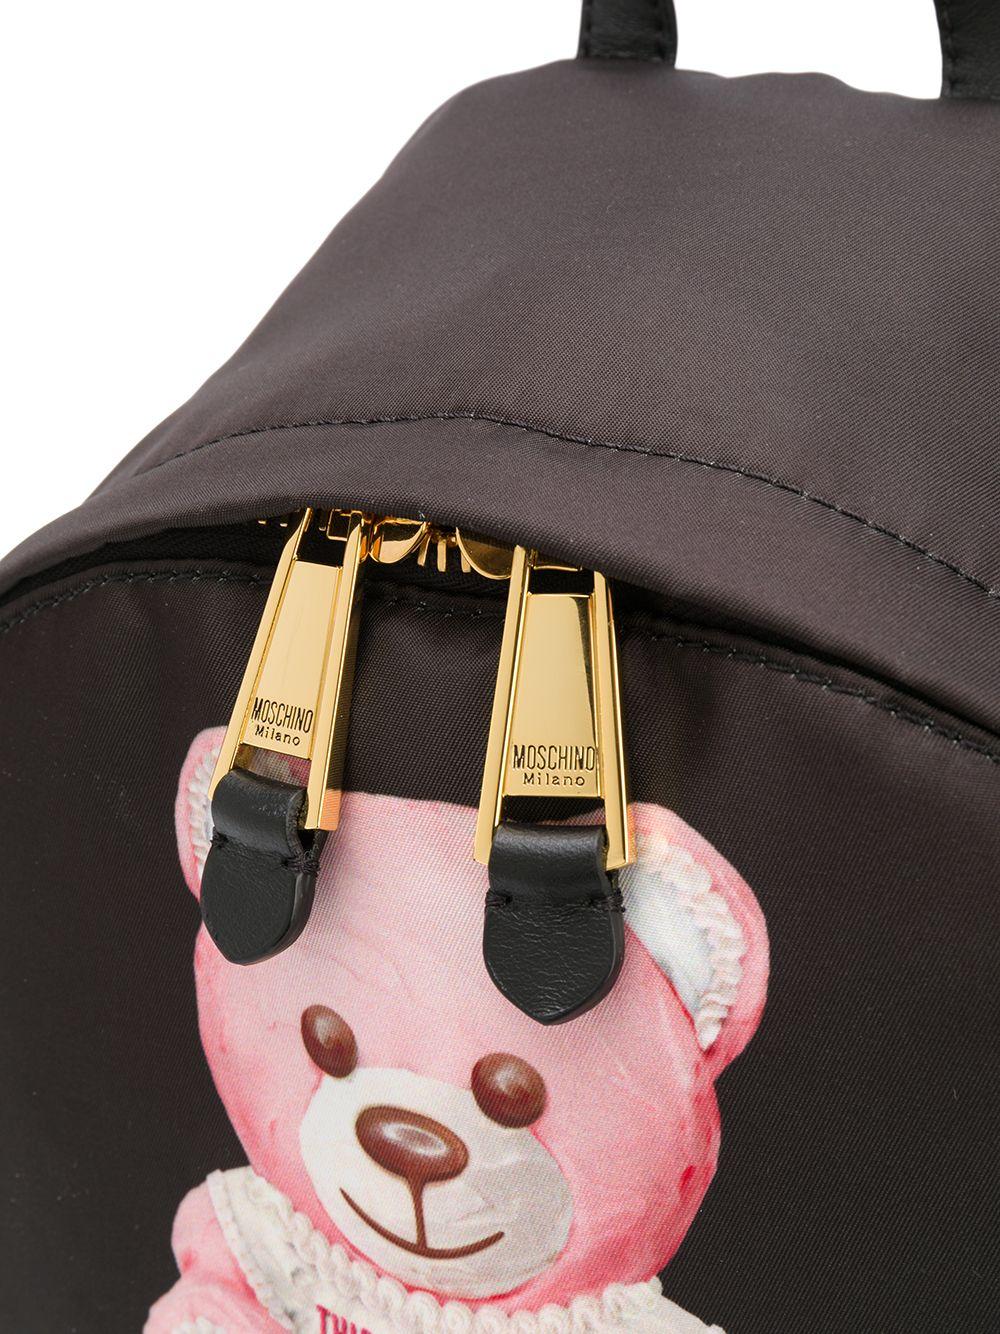 Moschino Synthetic Cake Teddy Bear Backpack in Nero (Black) - Lyst